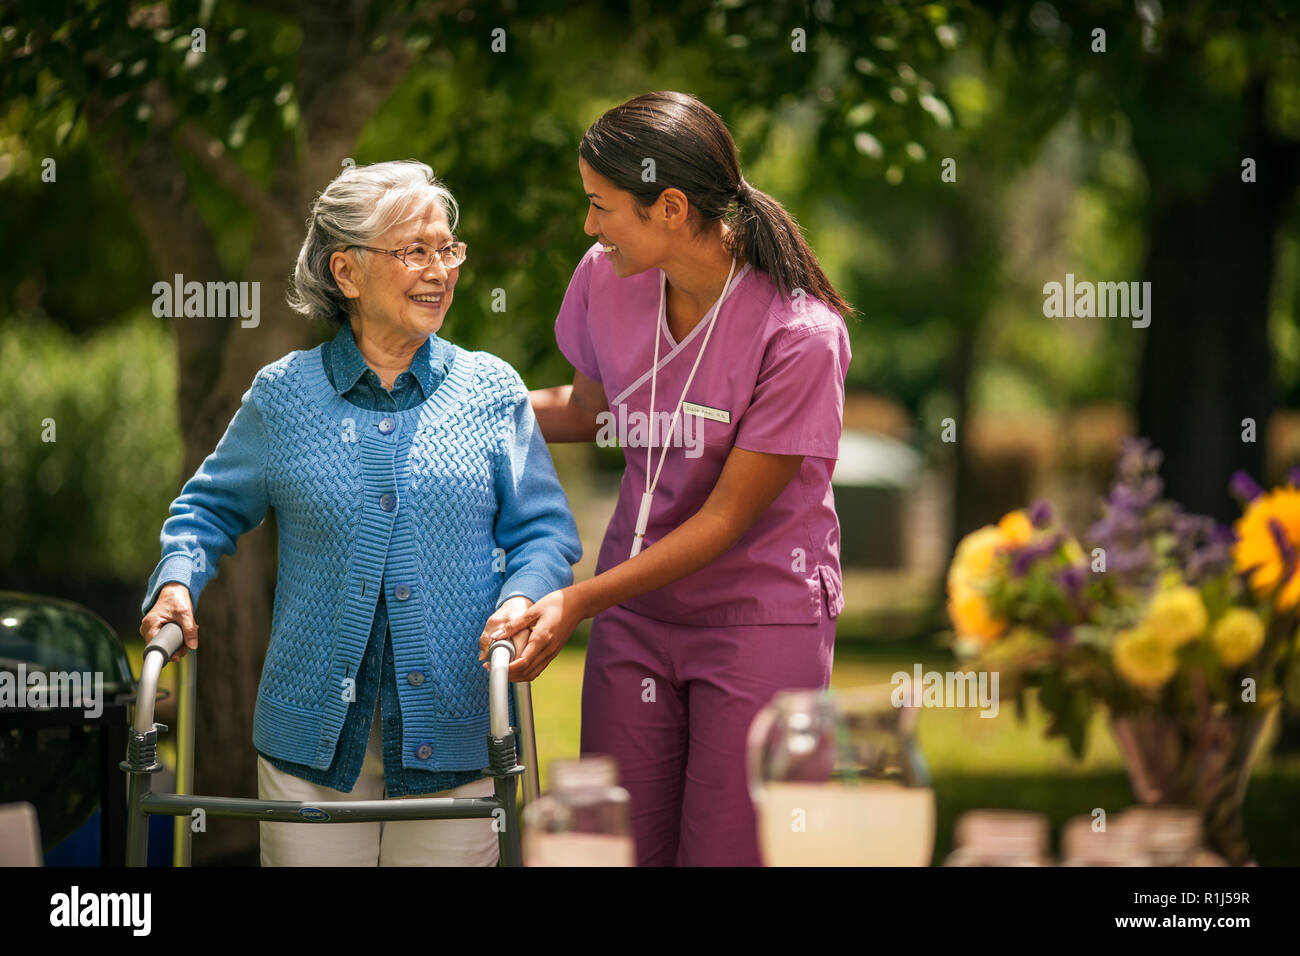 Friendly young nurse helps an elderly lady exercise with her walker in a sunny garden. Stock Photo